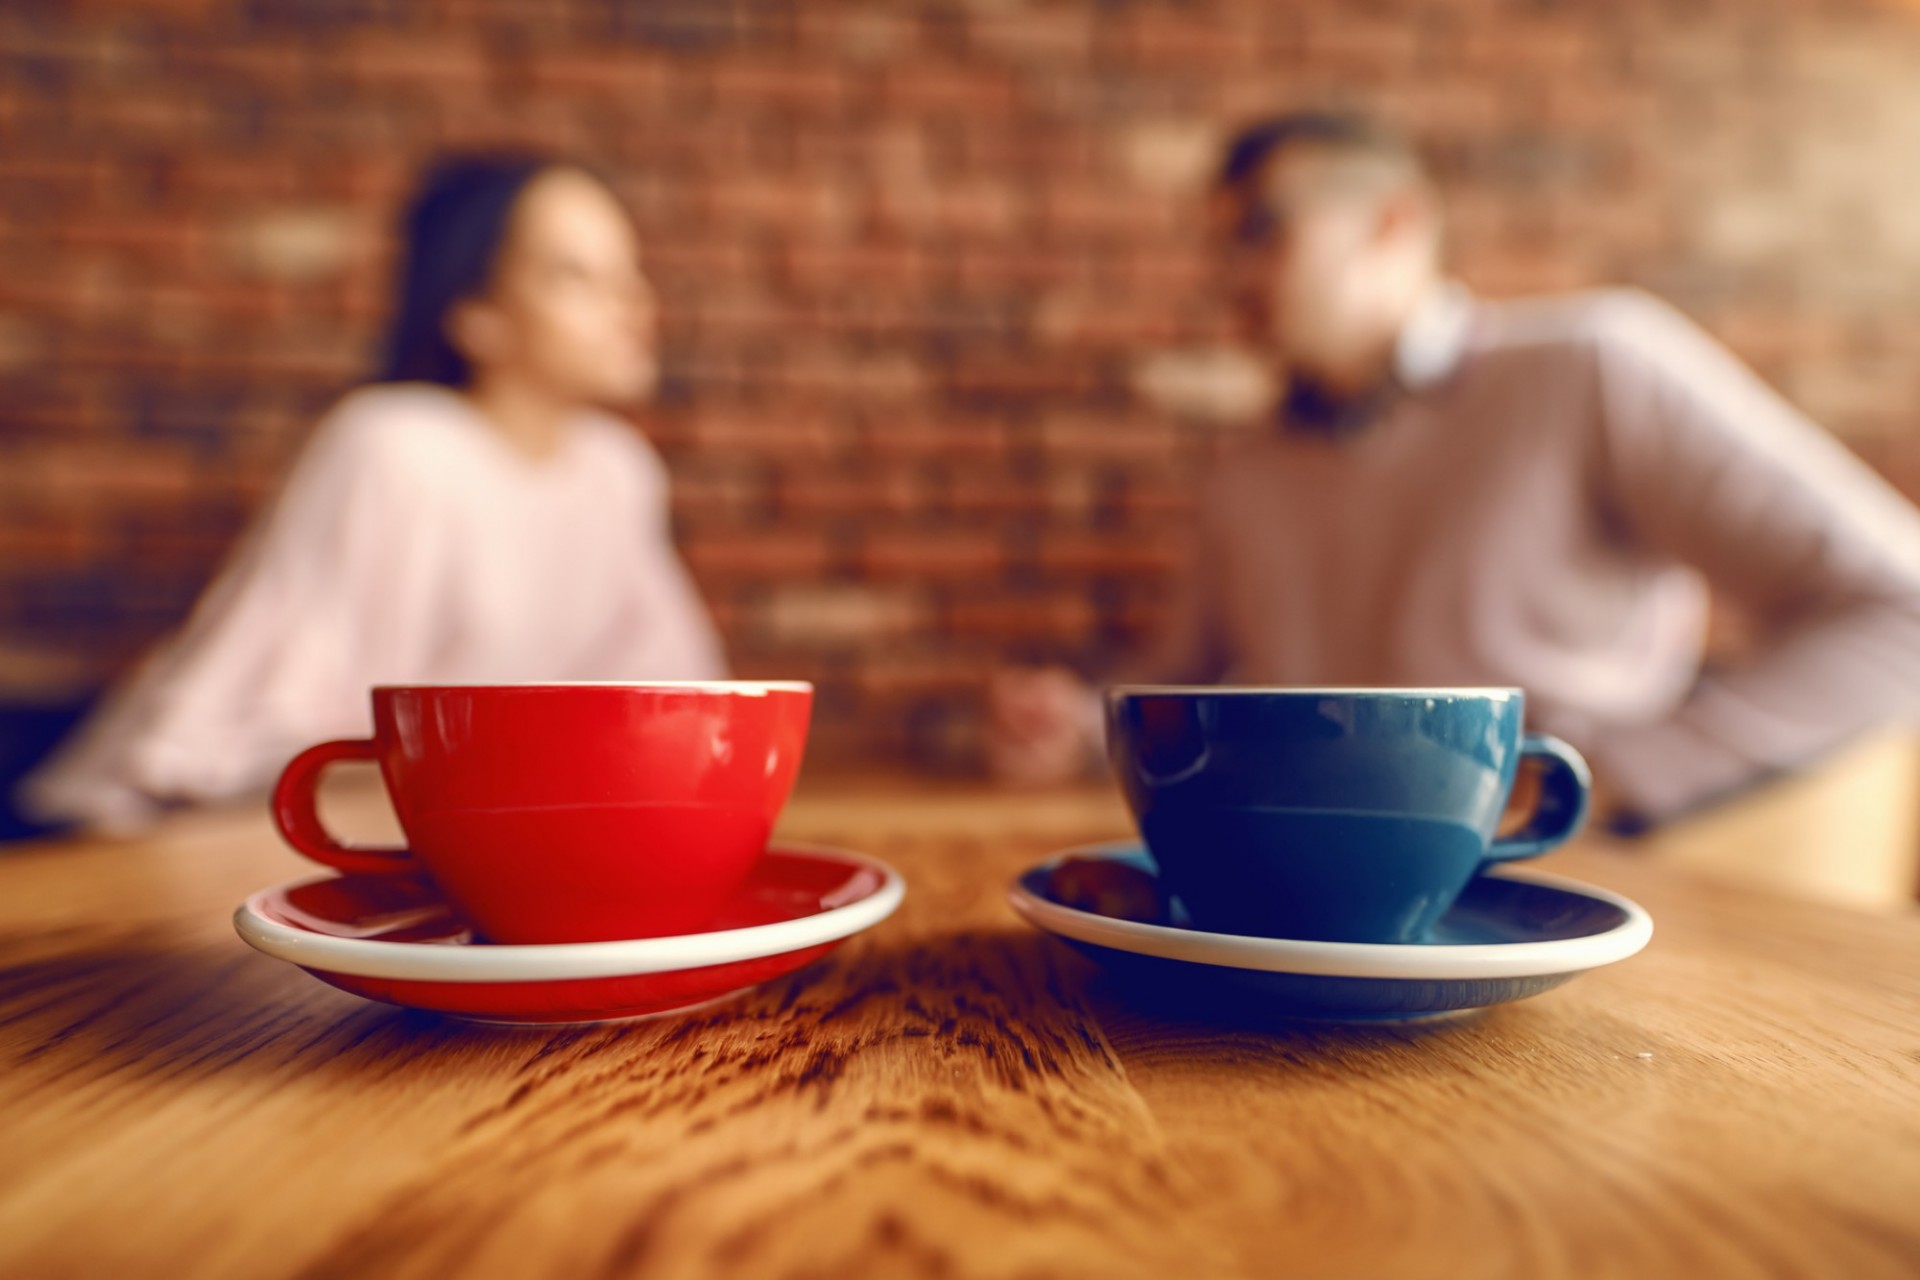 Two cups of coffee in foreground, 2 people having a conversation in the background.